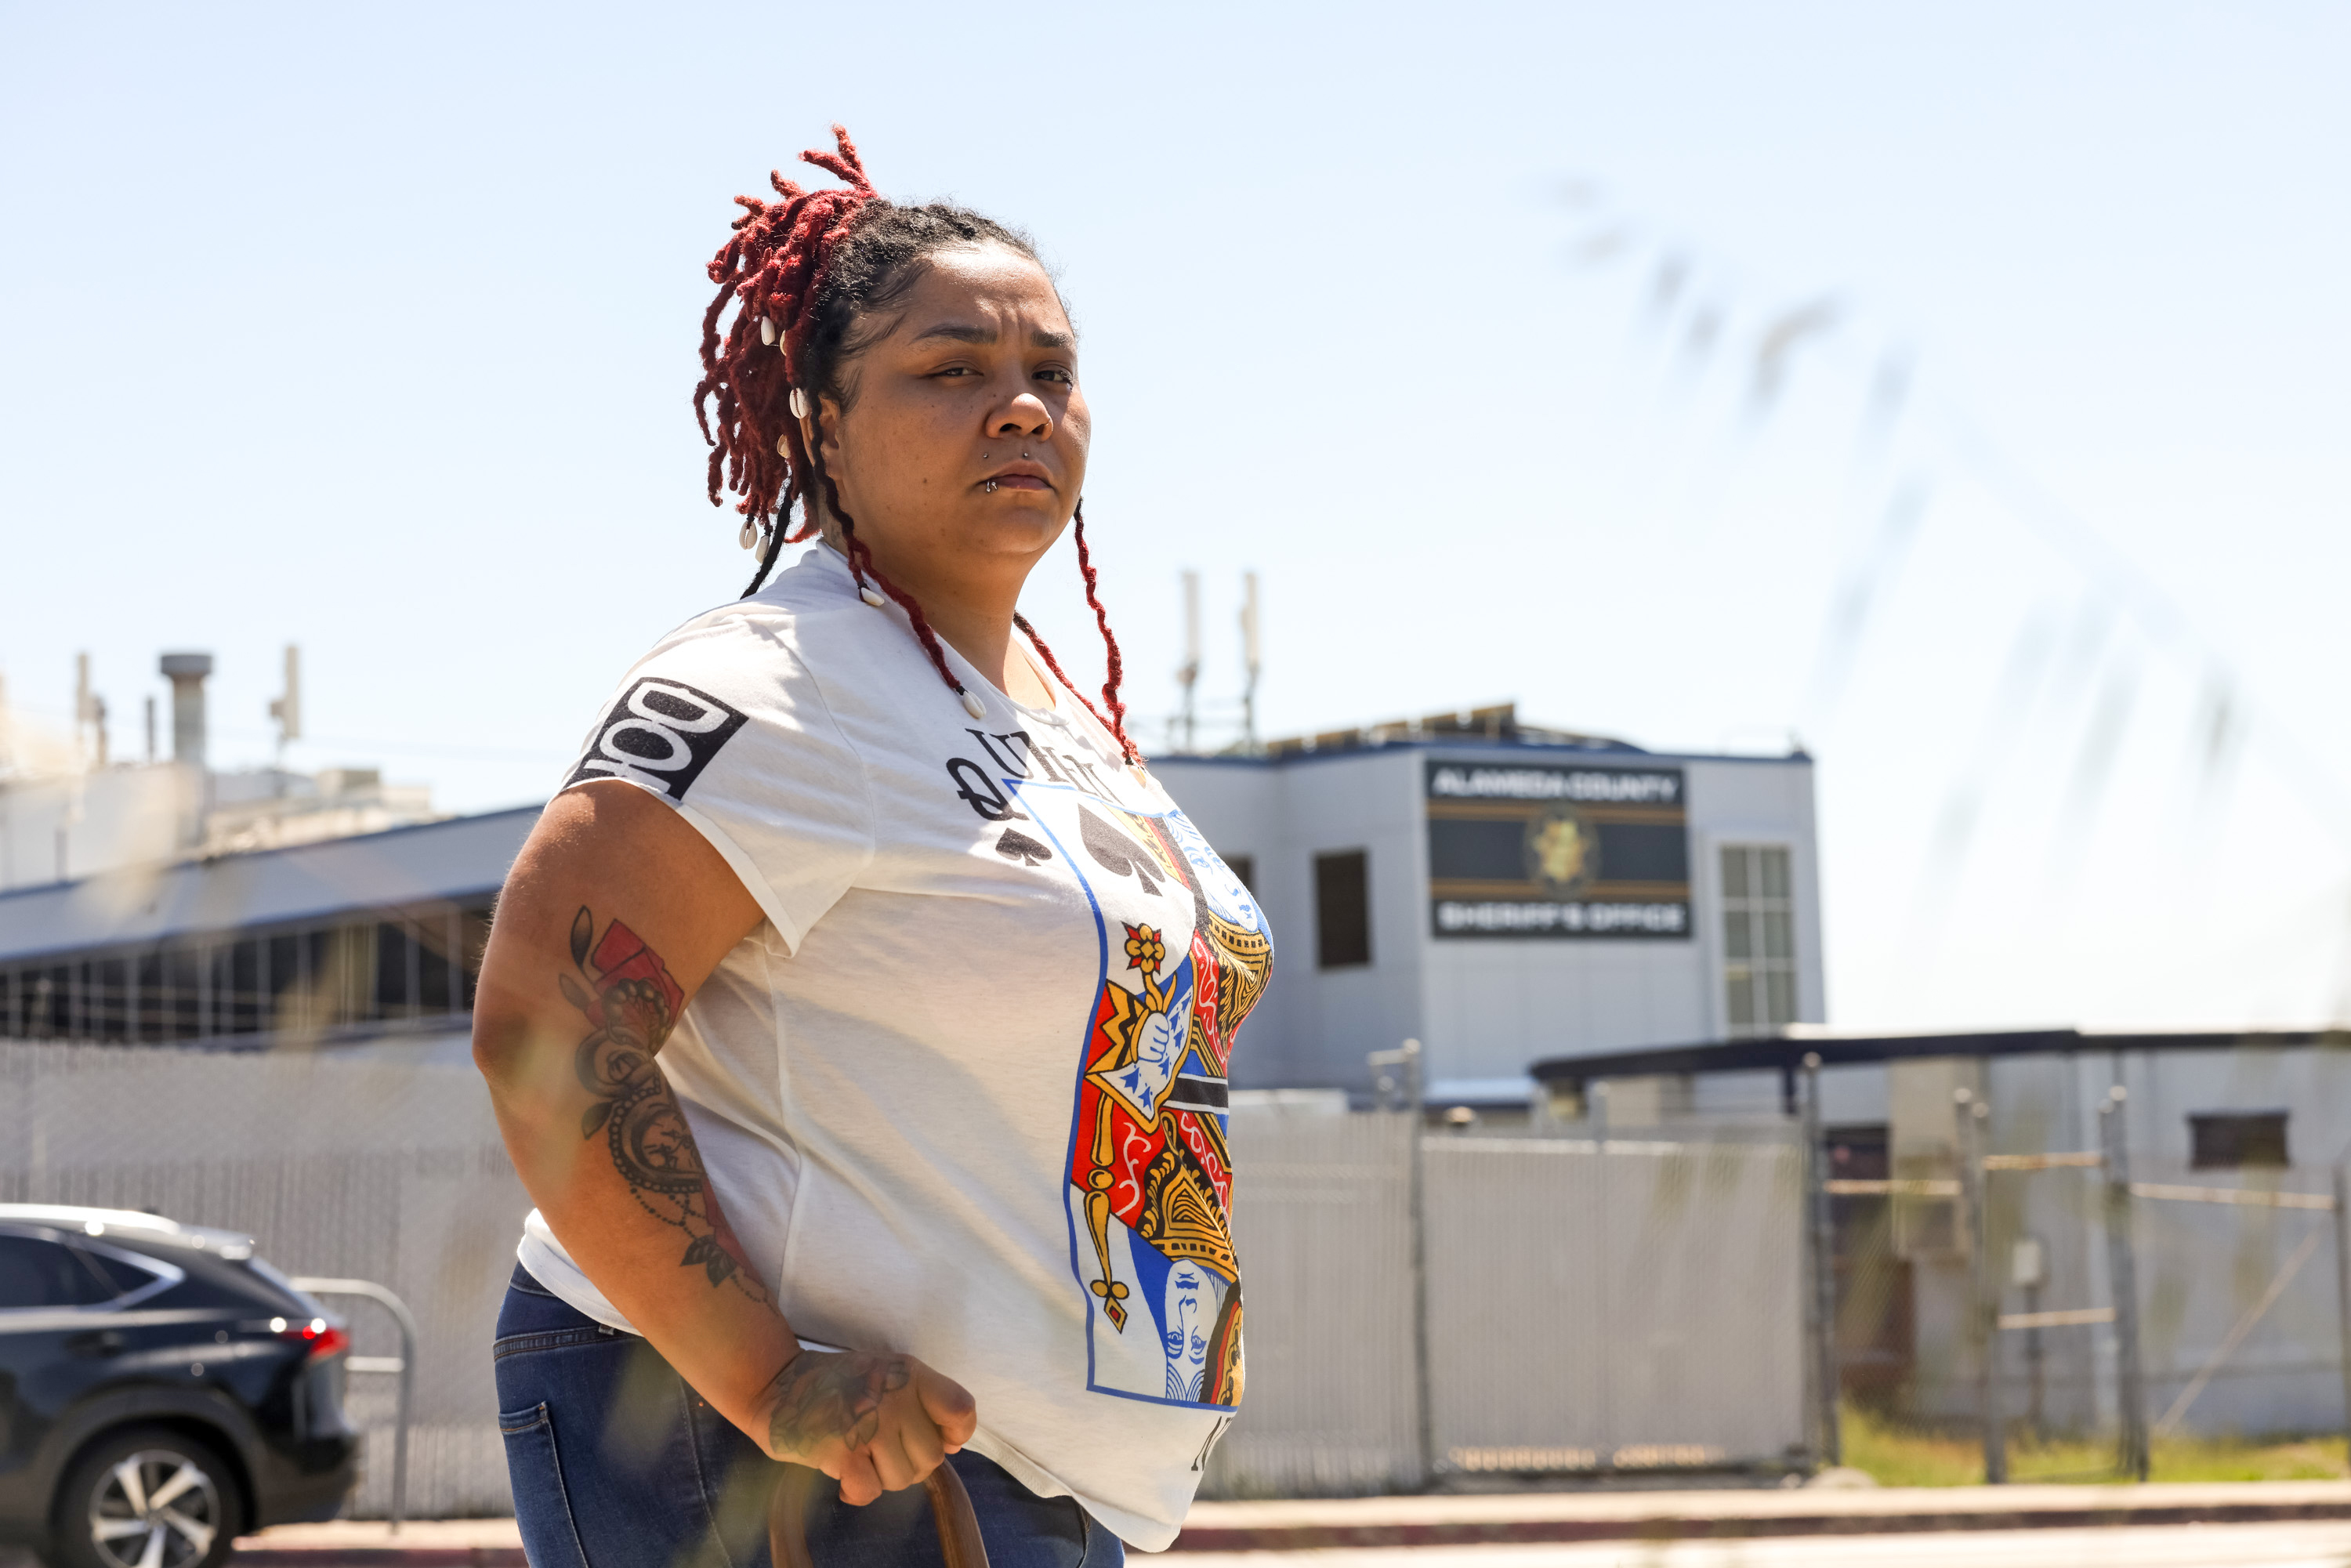 A person with red dreadlocks and tattoos stands confidently in front of an industrial backdrop, wearing a graphic t-shirt.